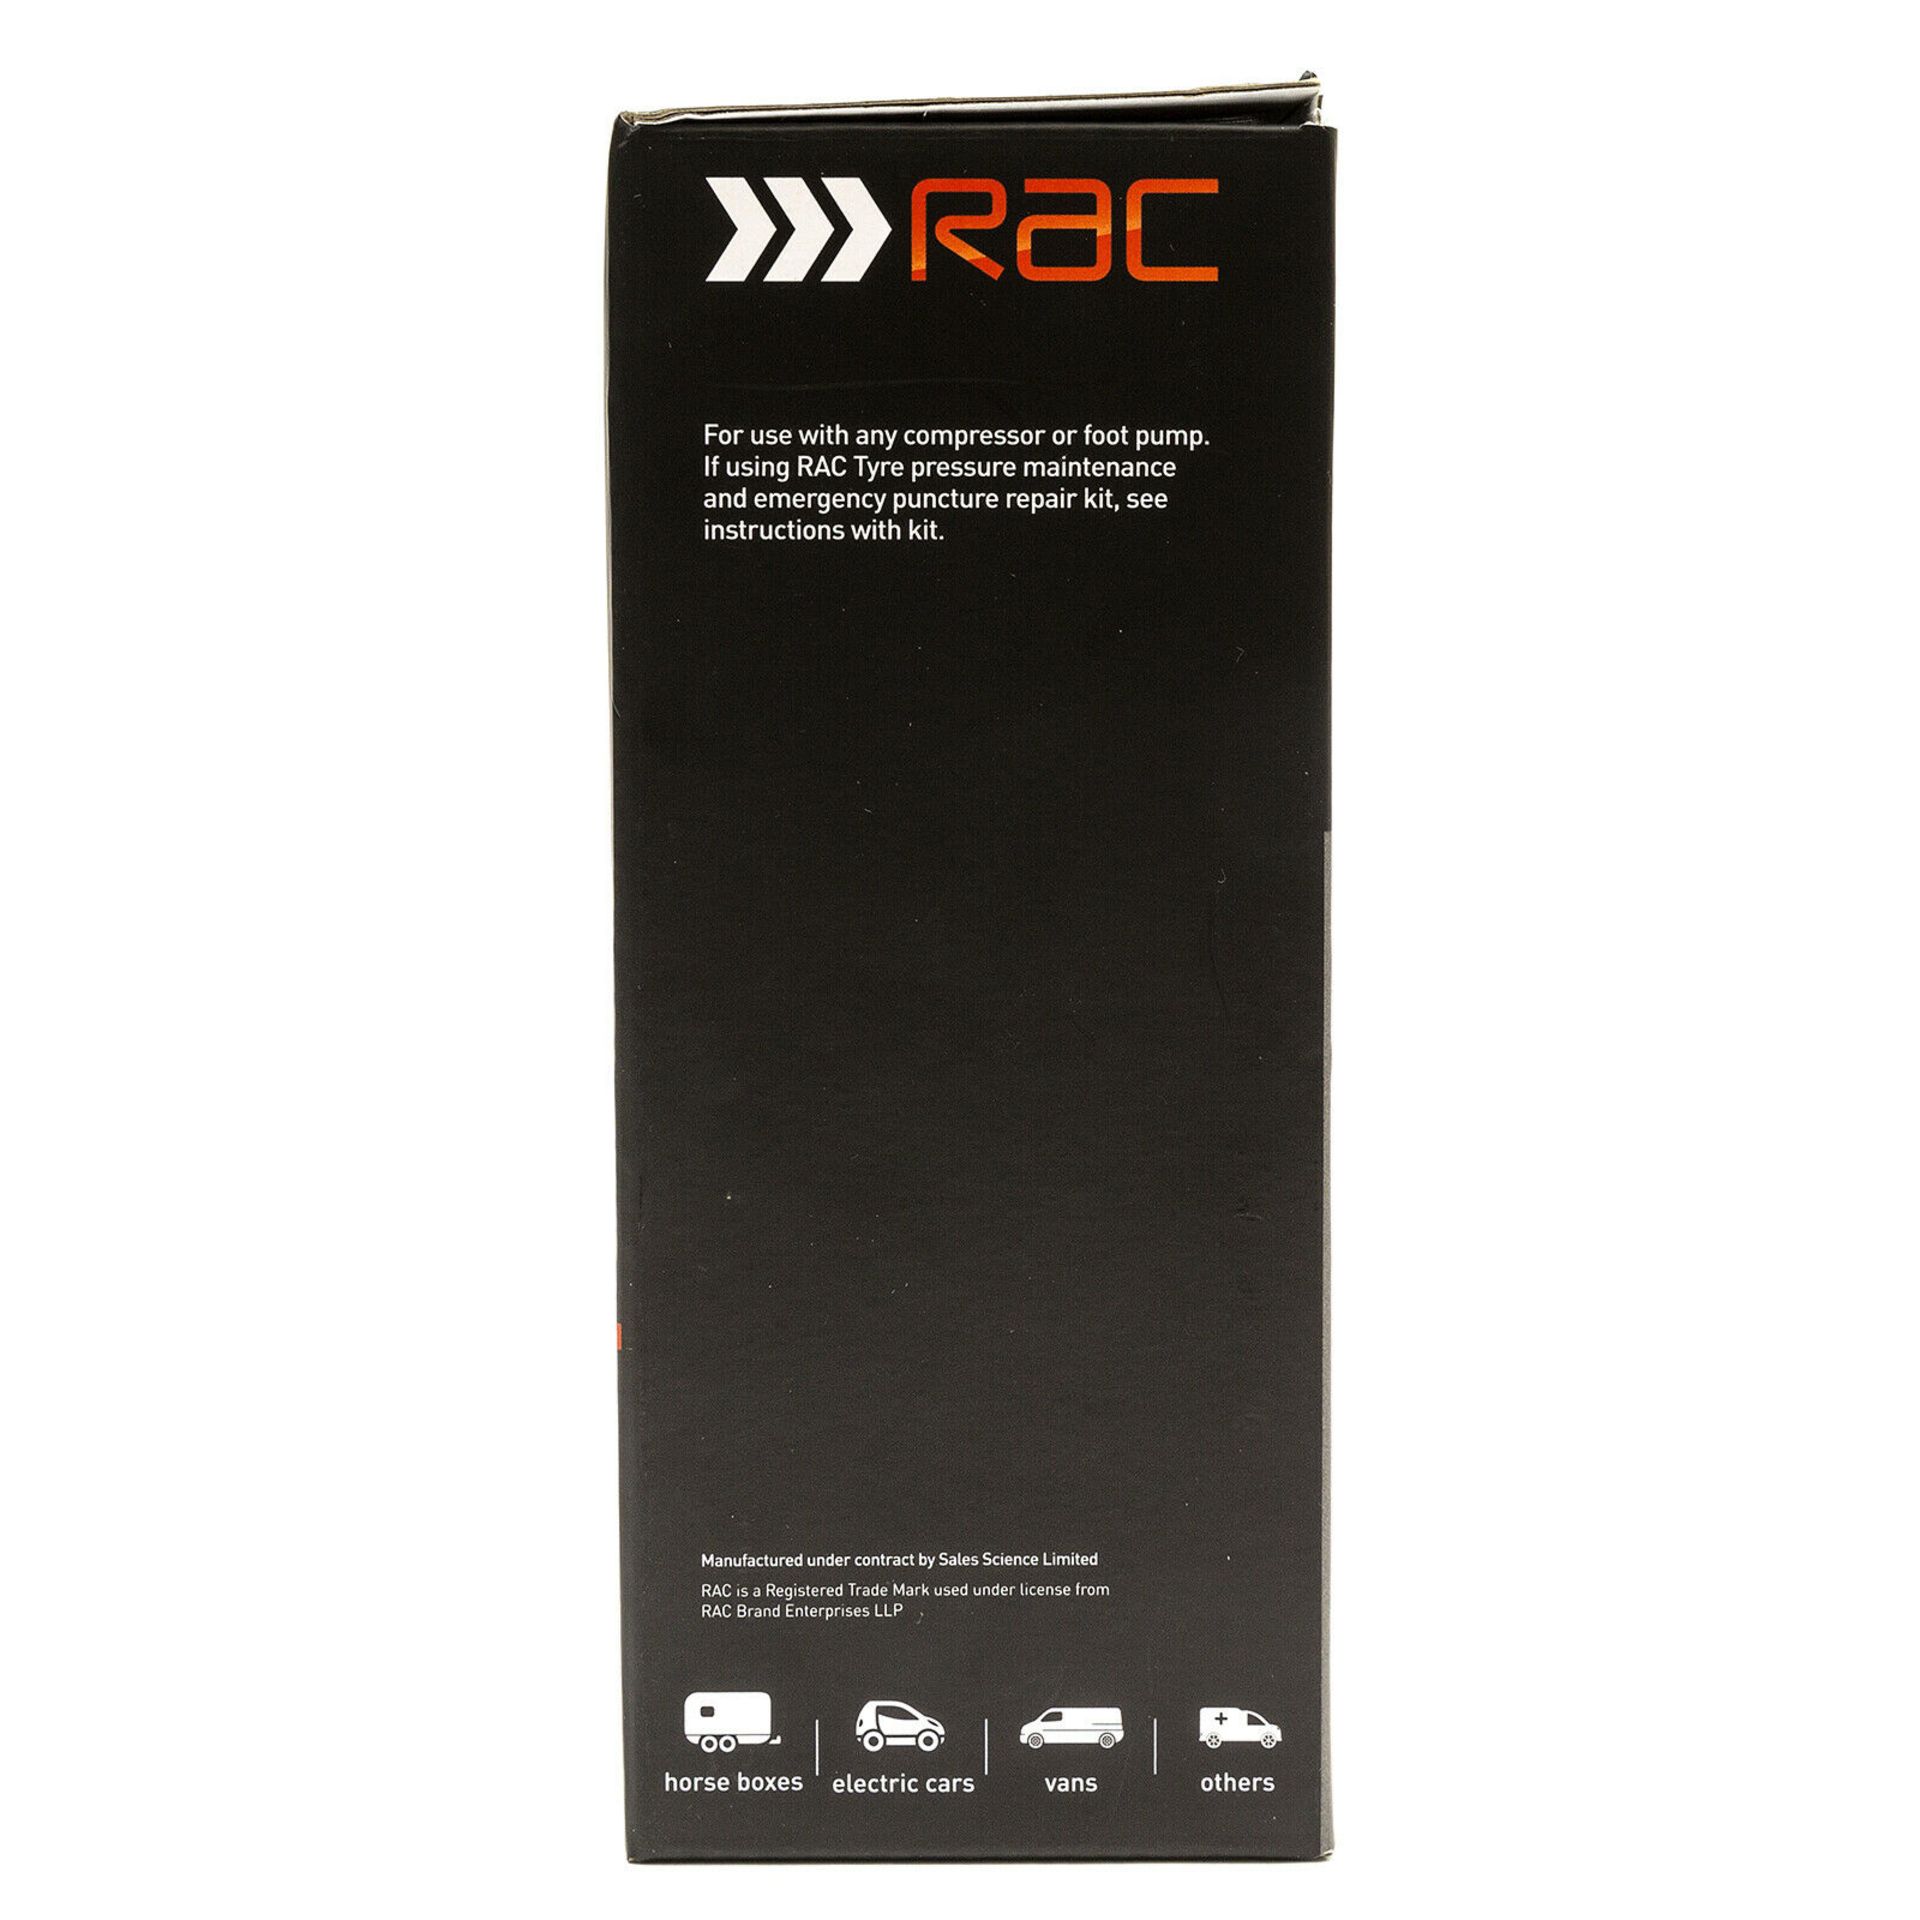 250 x RAC Emergency Tyre Sealant Puncture Repair Kits - New Boxed Resale Stock - Approx RRP £2,500! - Image 7 of 8